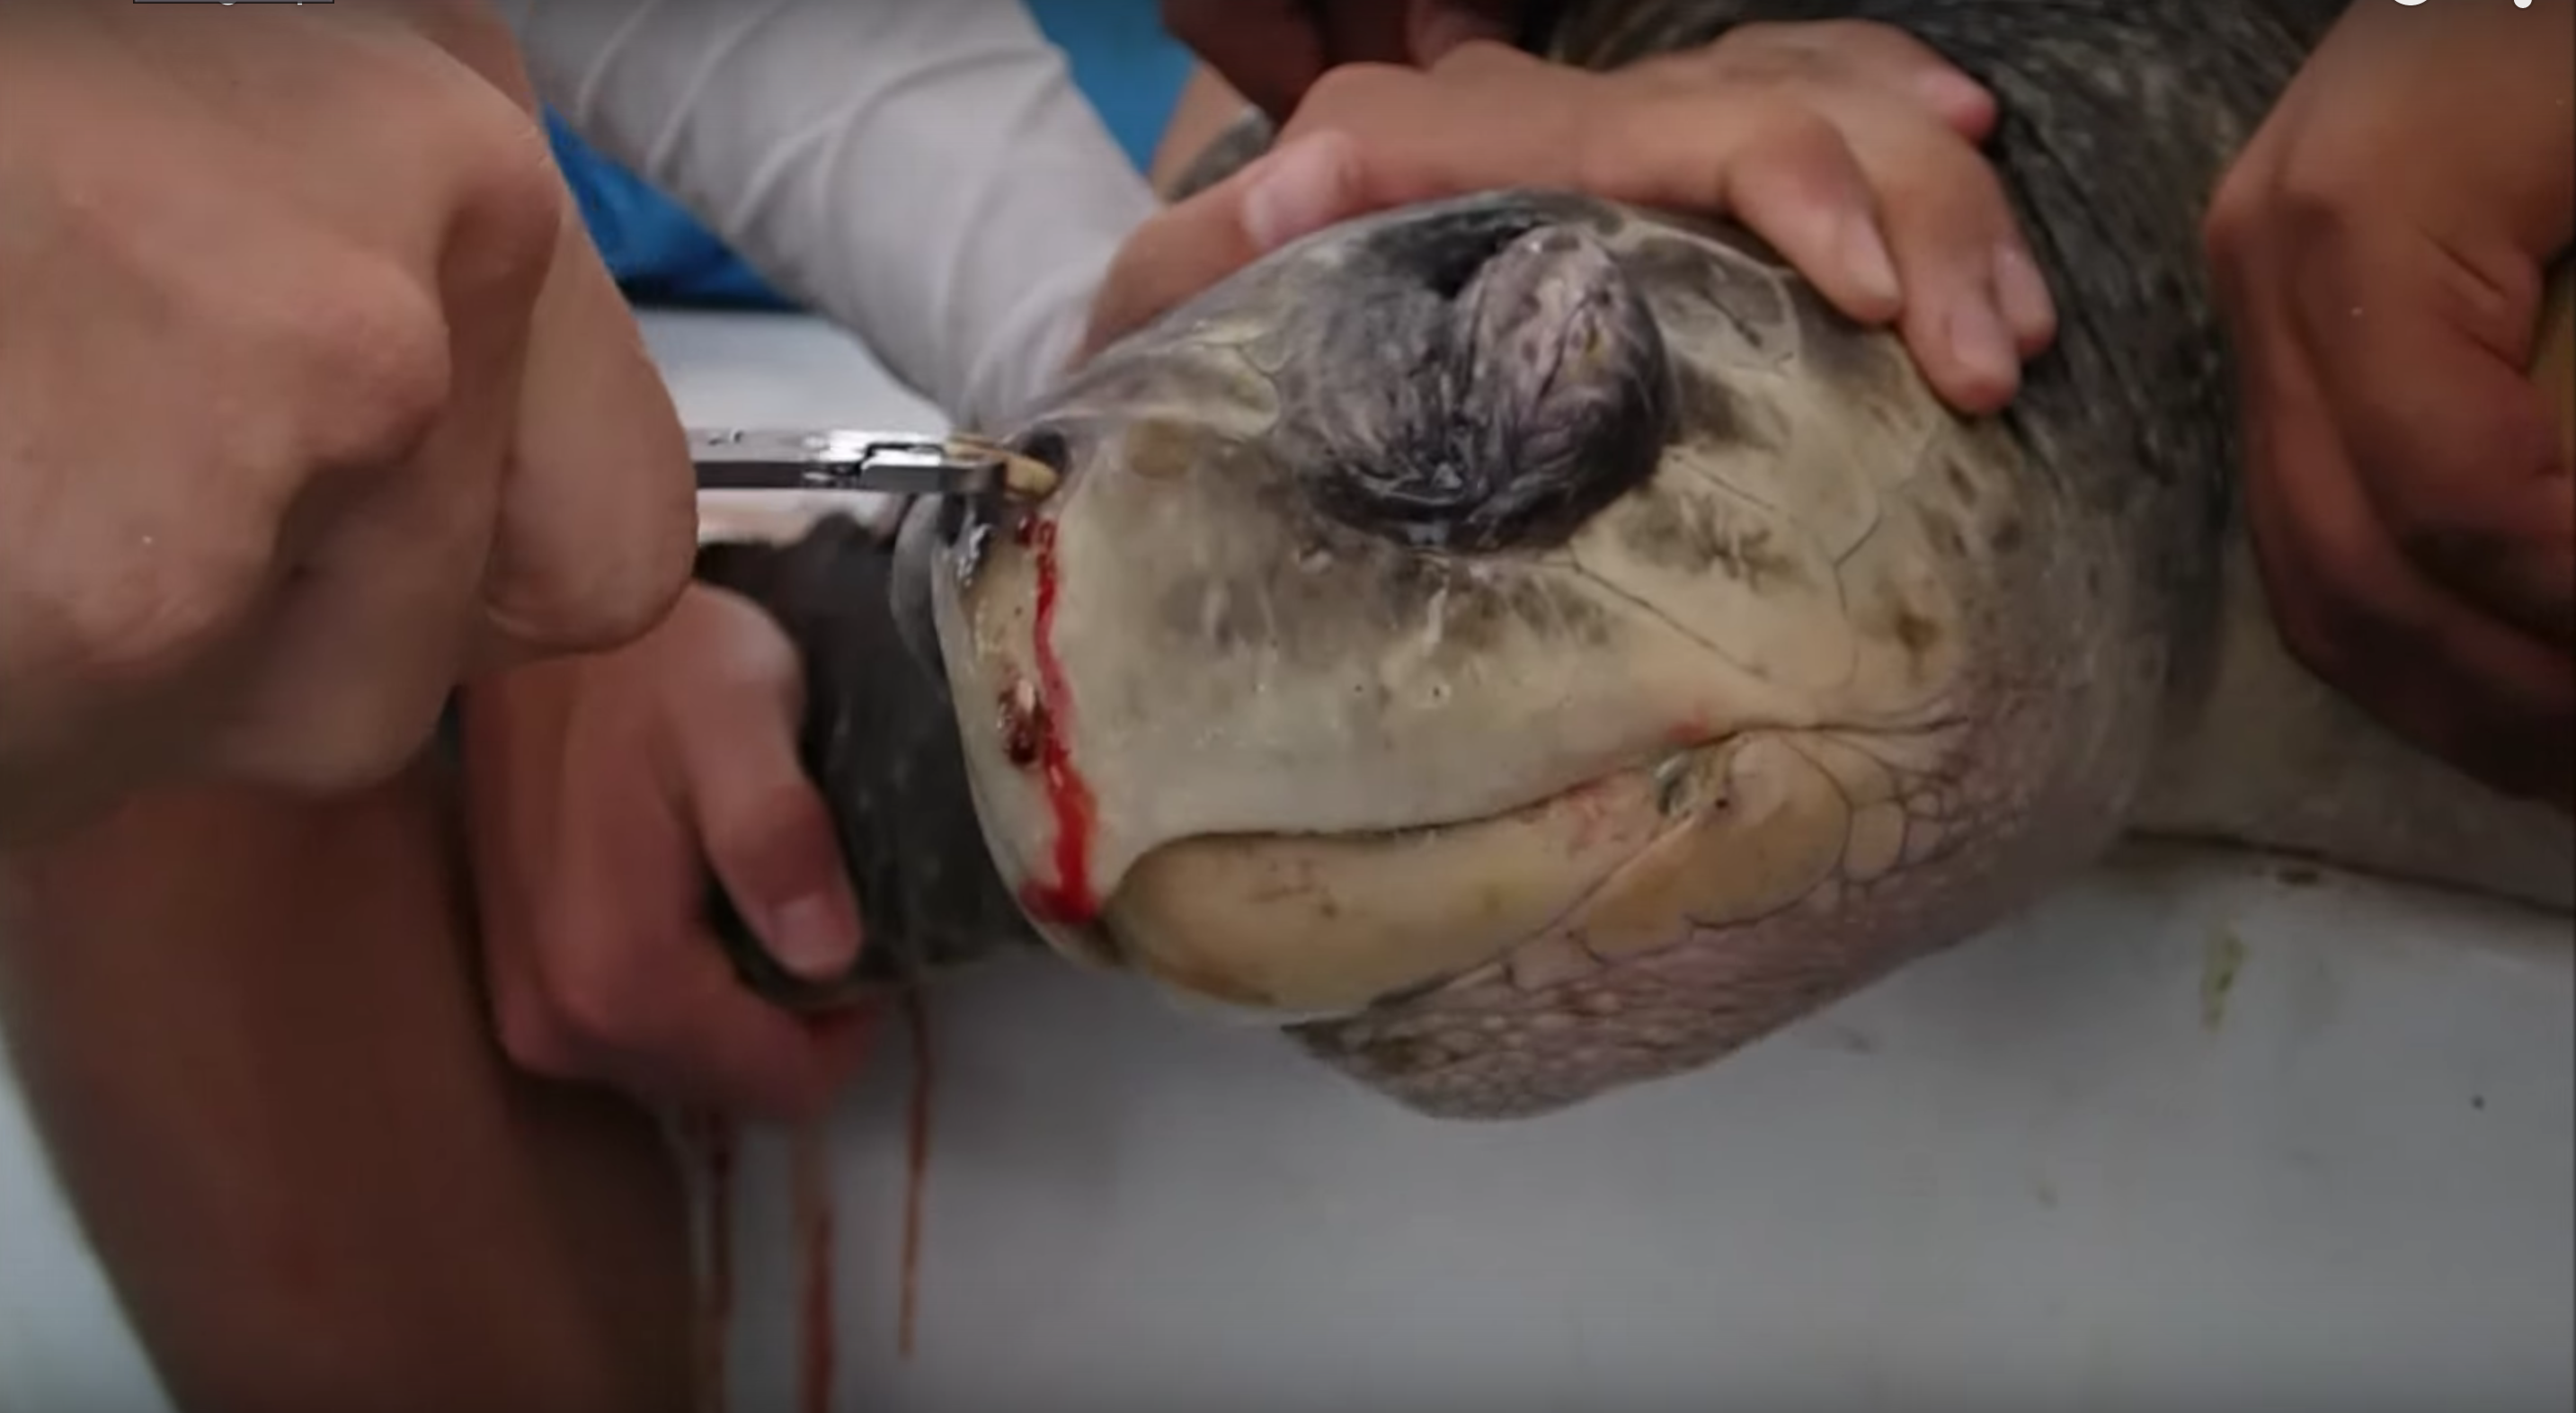 Video: Watch What One Plastic Straw Does To Endangered Sea Turtle